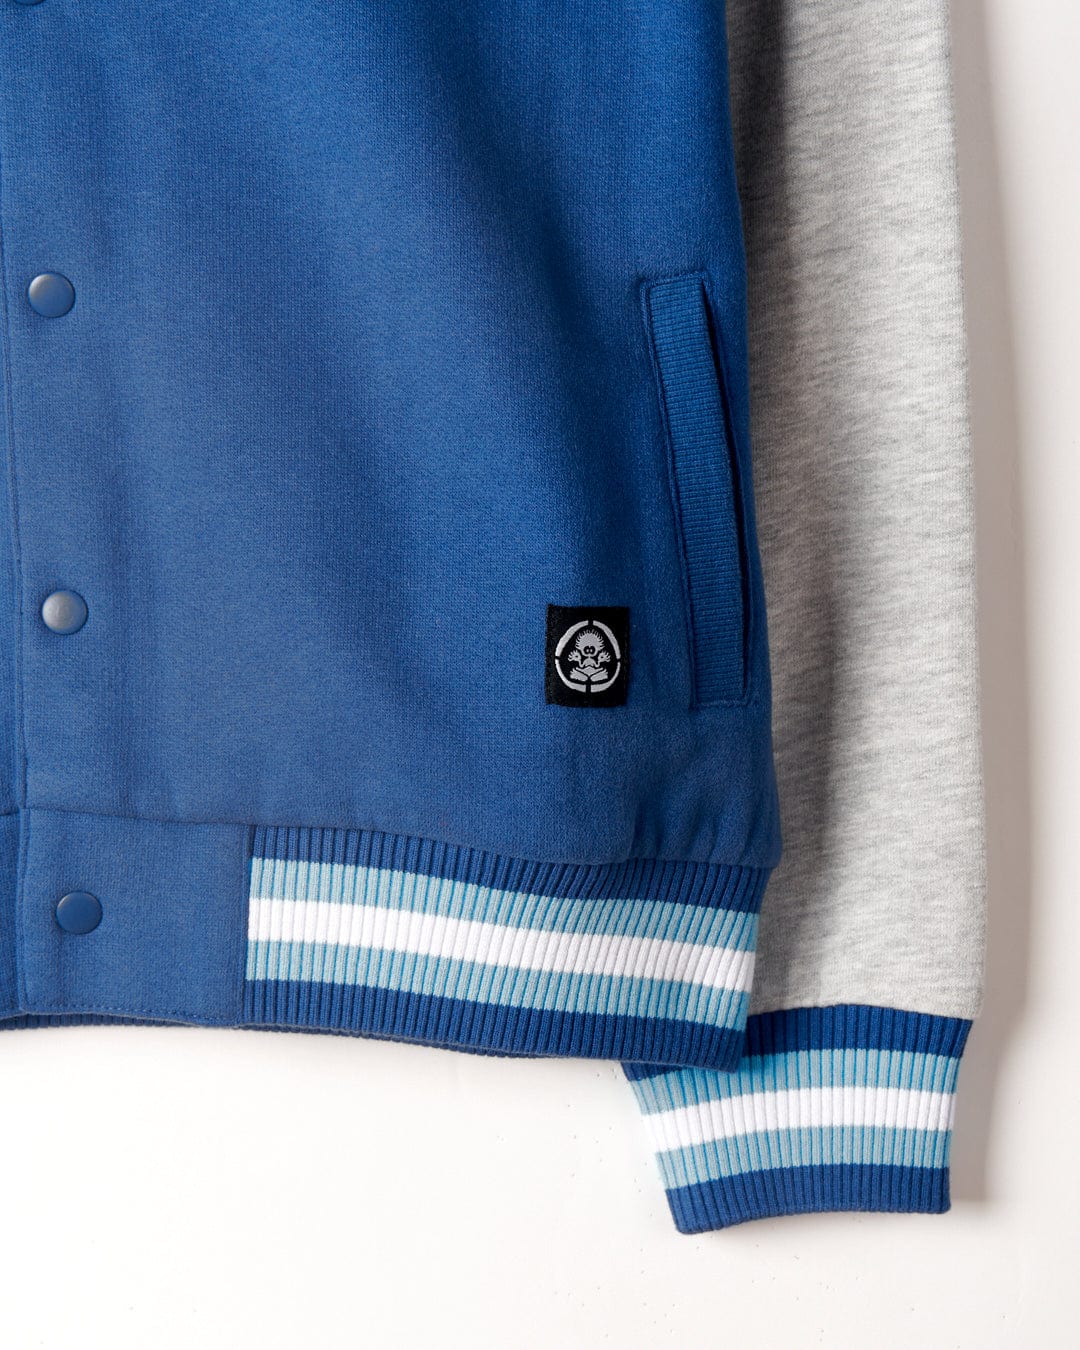 Close-up of a blue and gray Krew - Recycled Varsity Bomber Jacket - Blue with a white, blue, and turquoise striped cuff; features the Saltrock branding and a monkey head logo near the pocket.